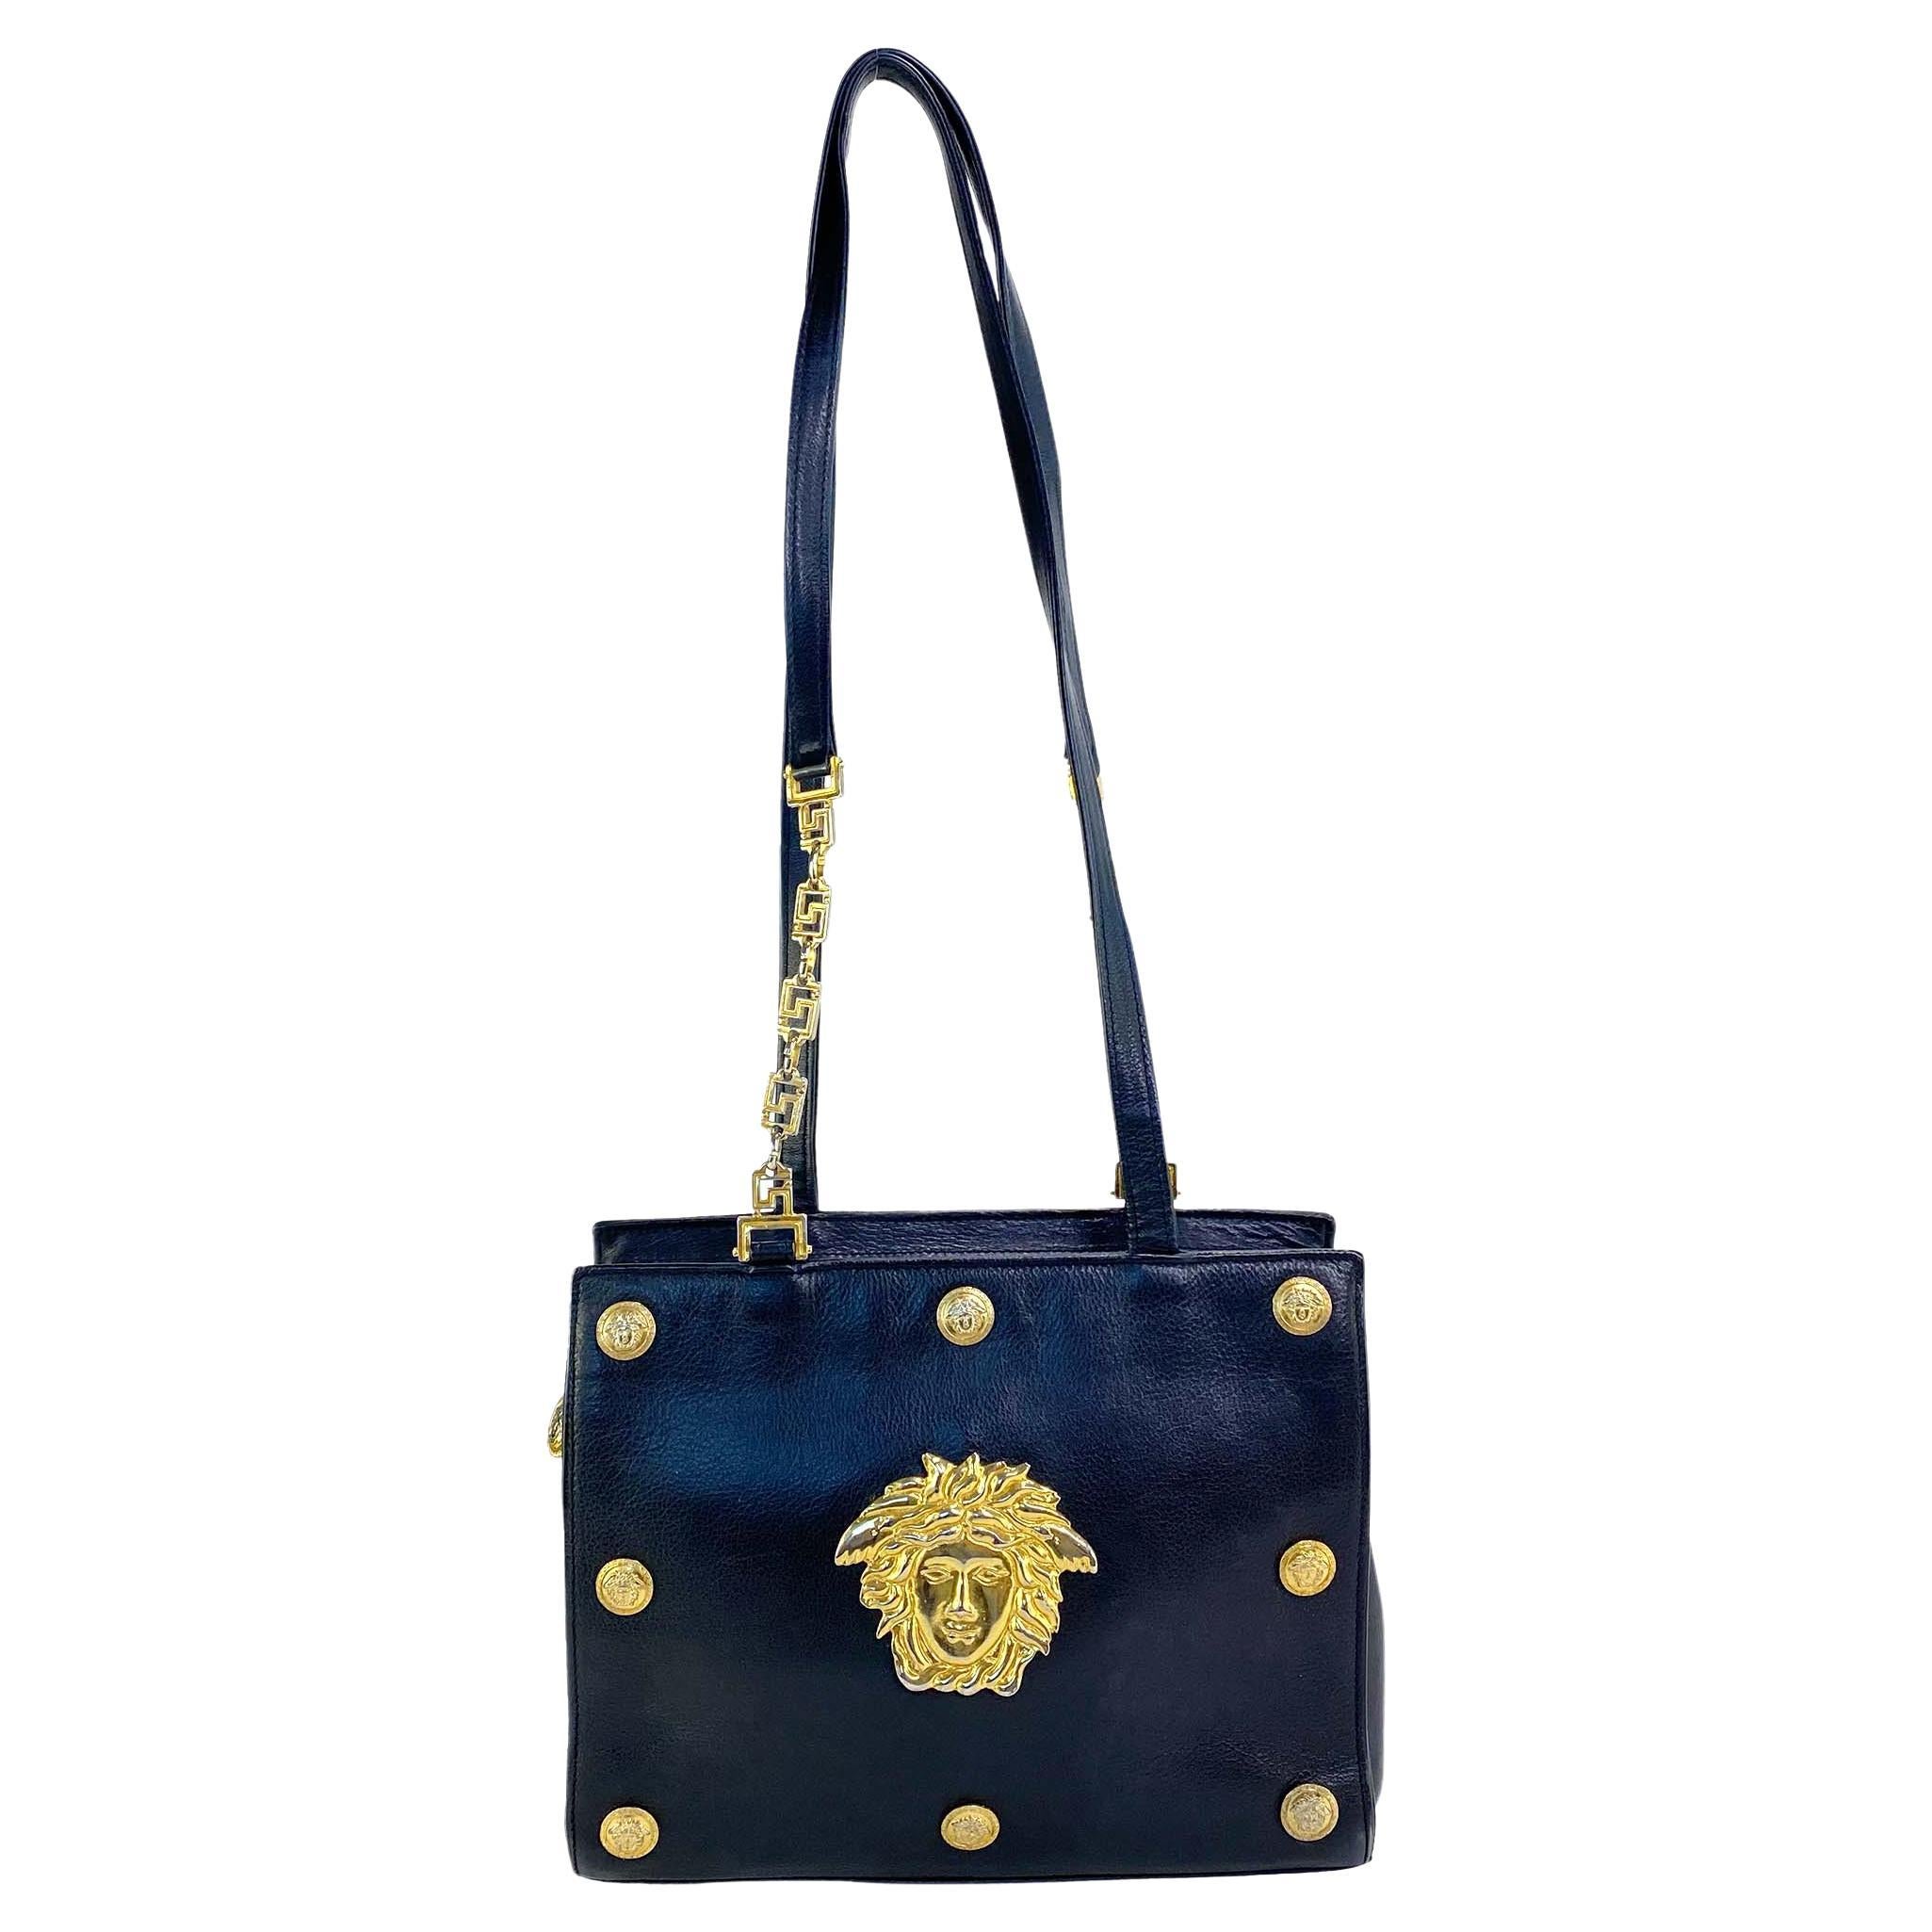 Gianni Versace Couture Crossbody Bags and Messenger Bags